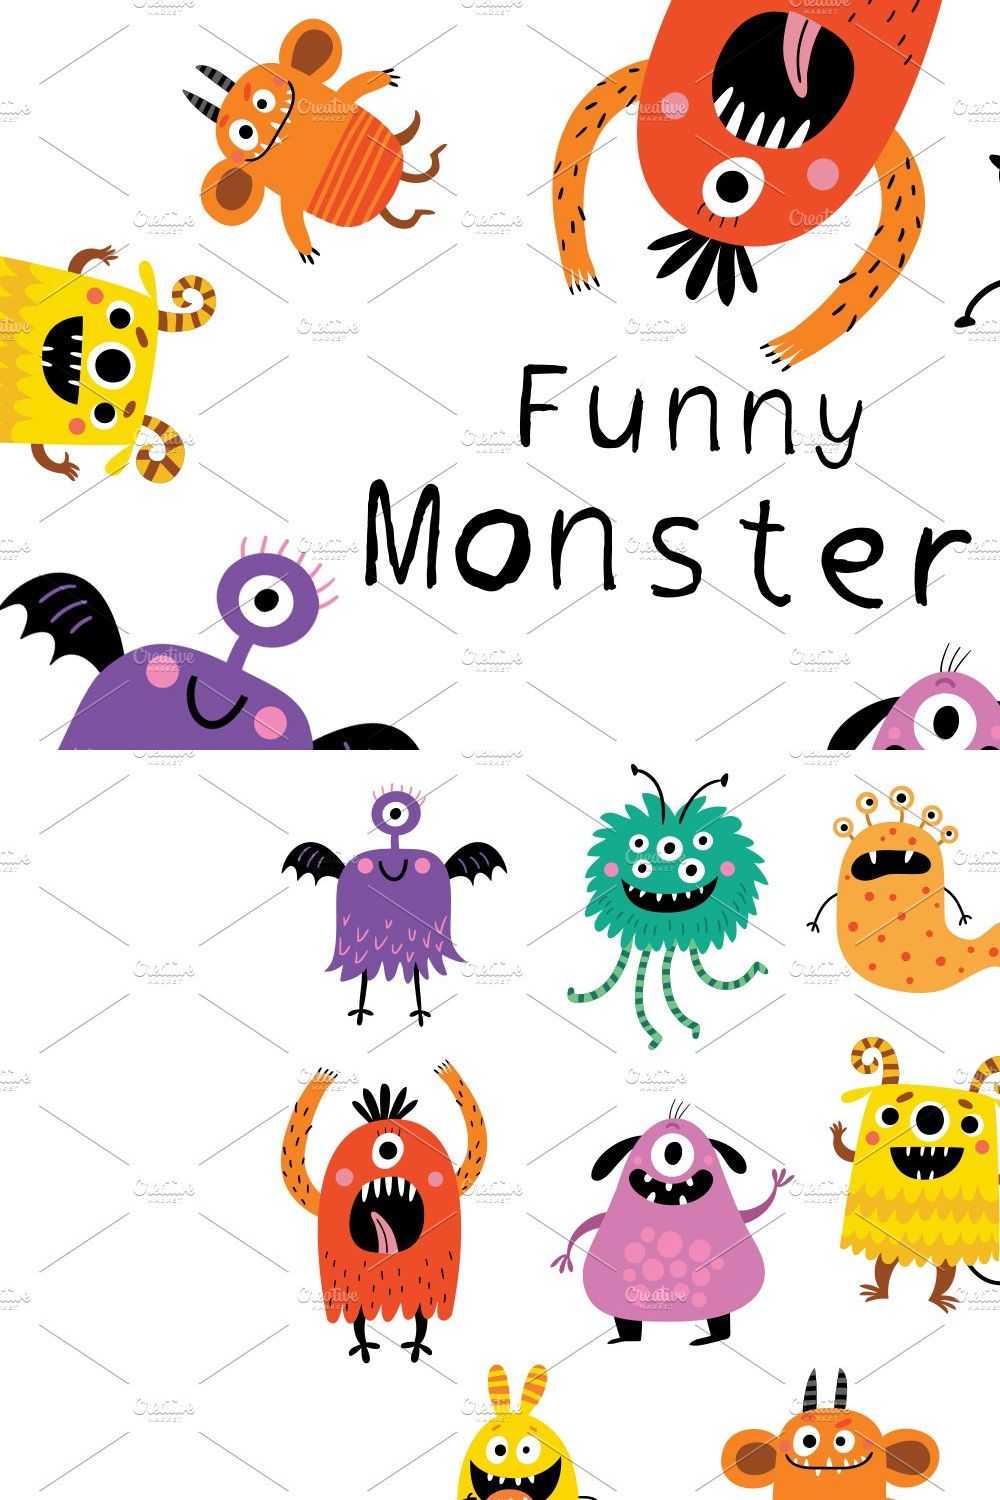 Funny Monsters vector set pinterest preview image.